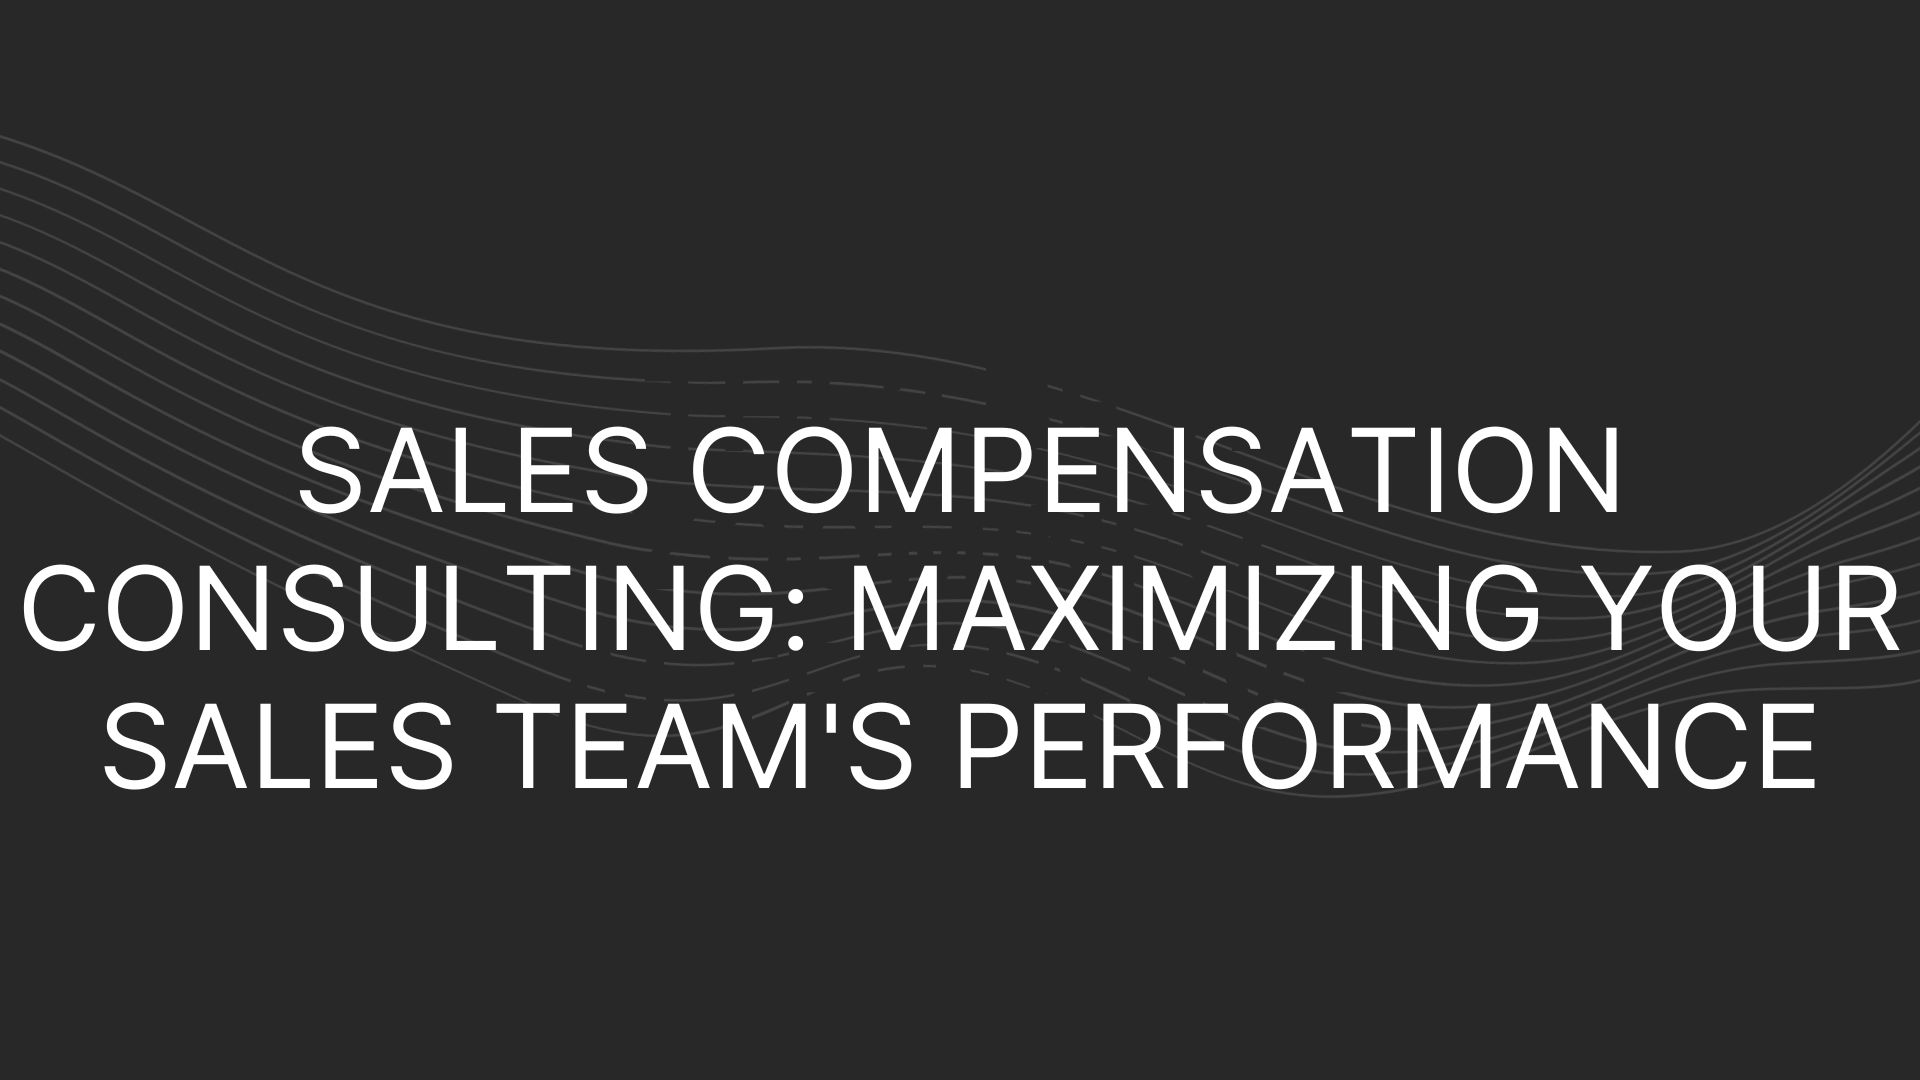 Sales Compensation Consulting